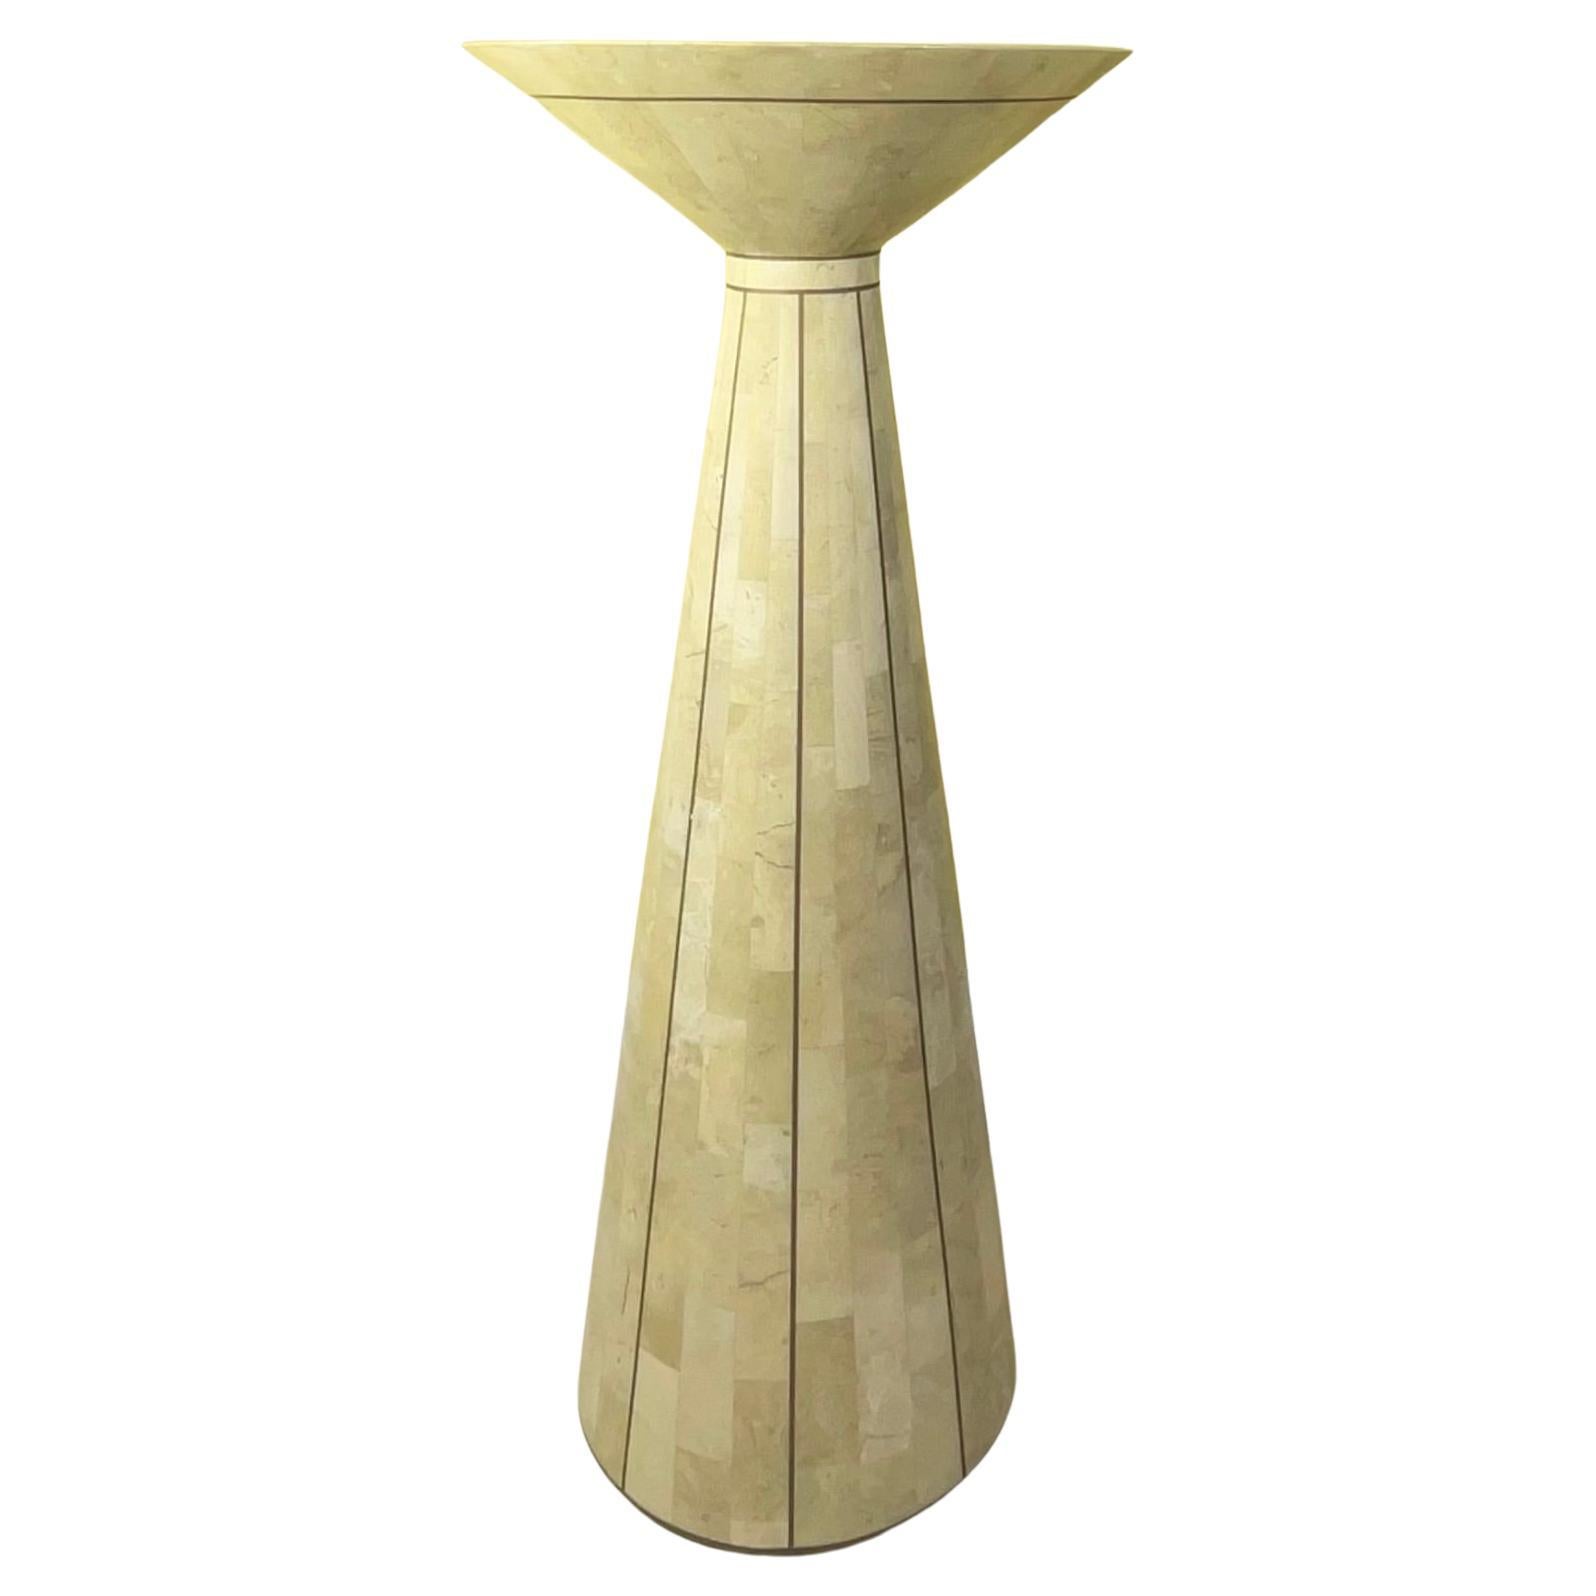 Tessellated Stone Pedestal with Brass Accents by Maitland Smith For Sale